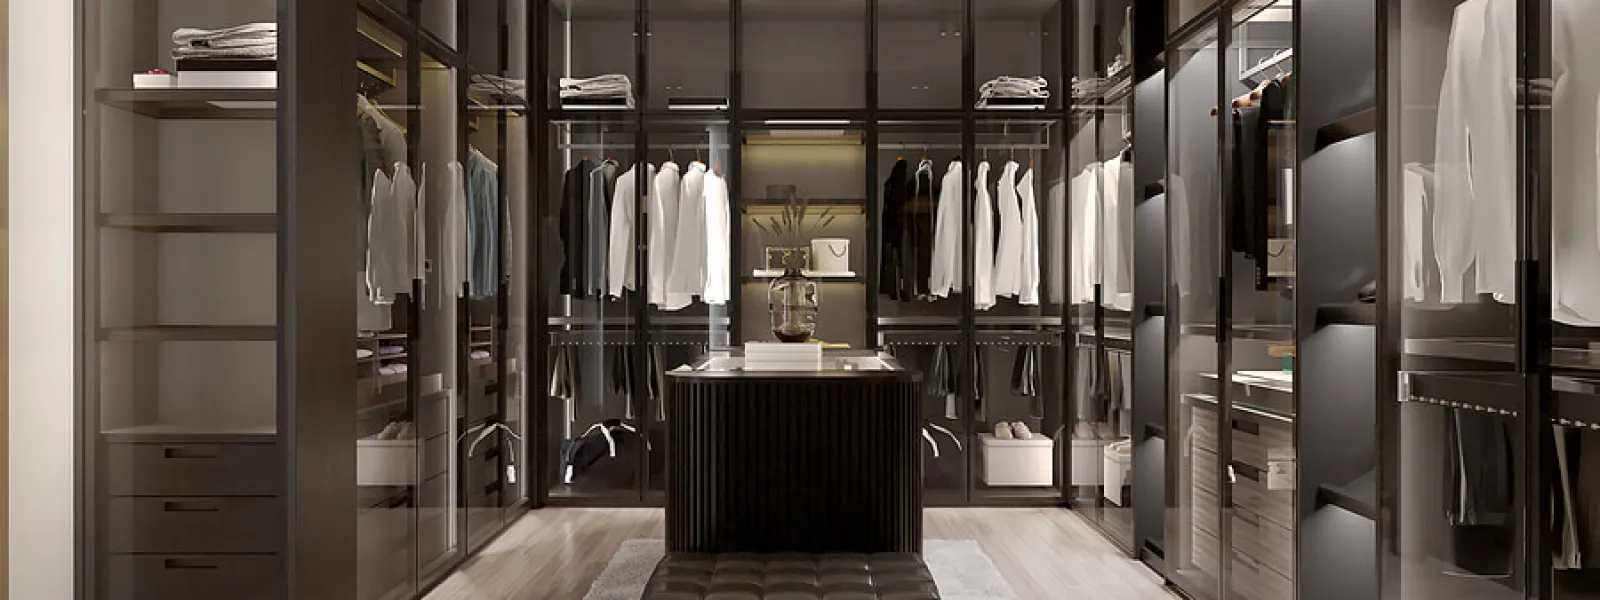 a room with a large display of clothing